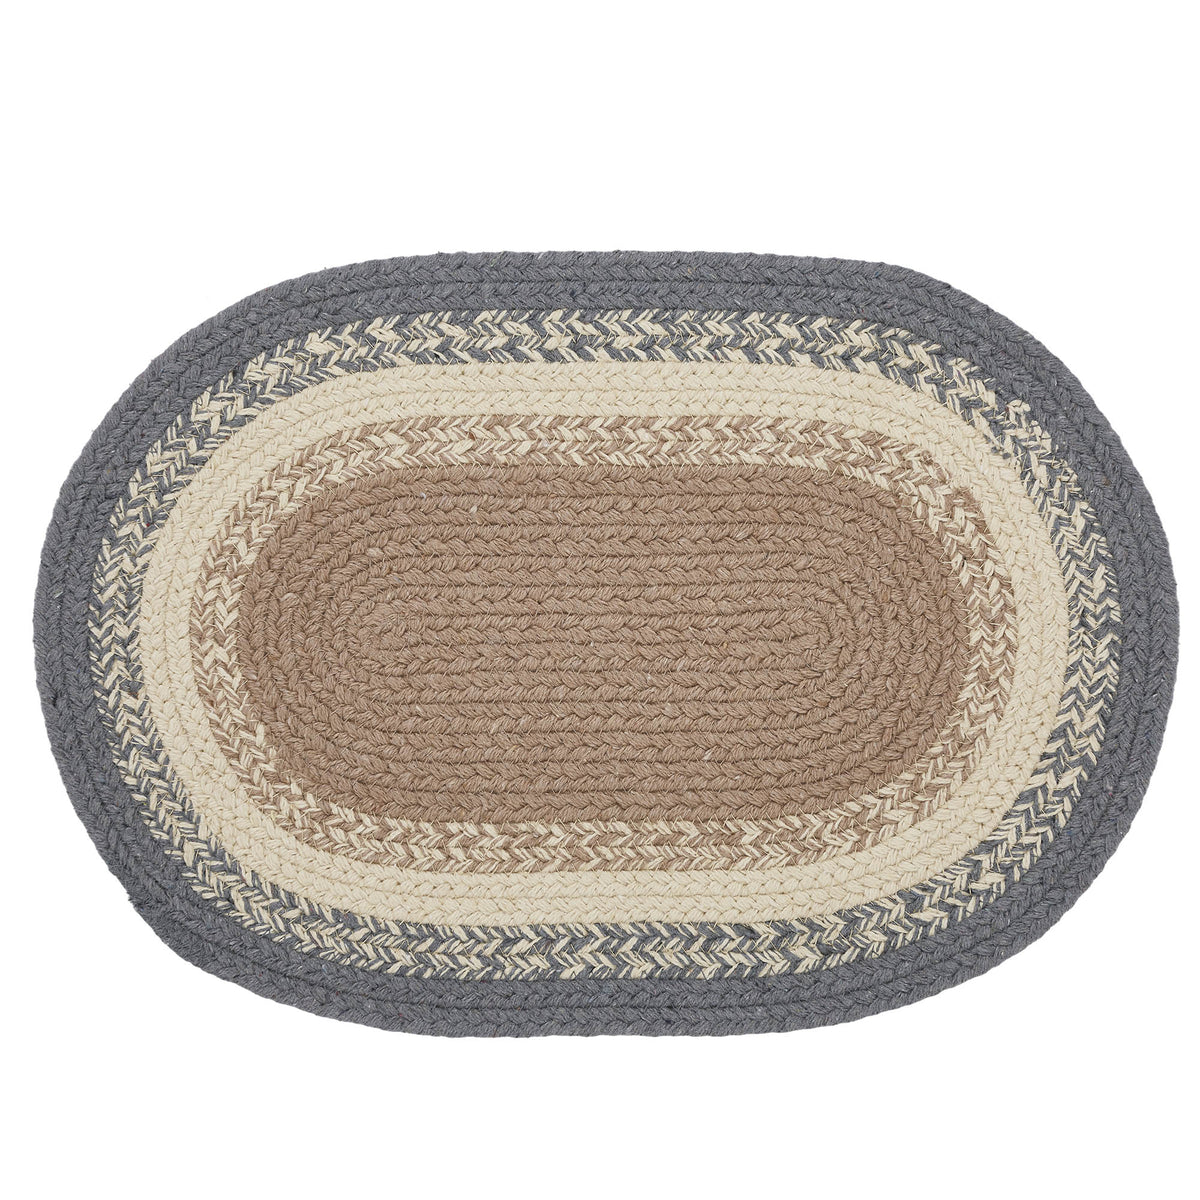 Finders Keepers Oval Placemat 10x15